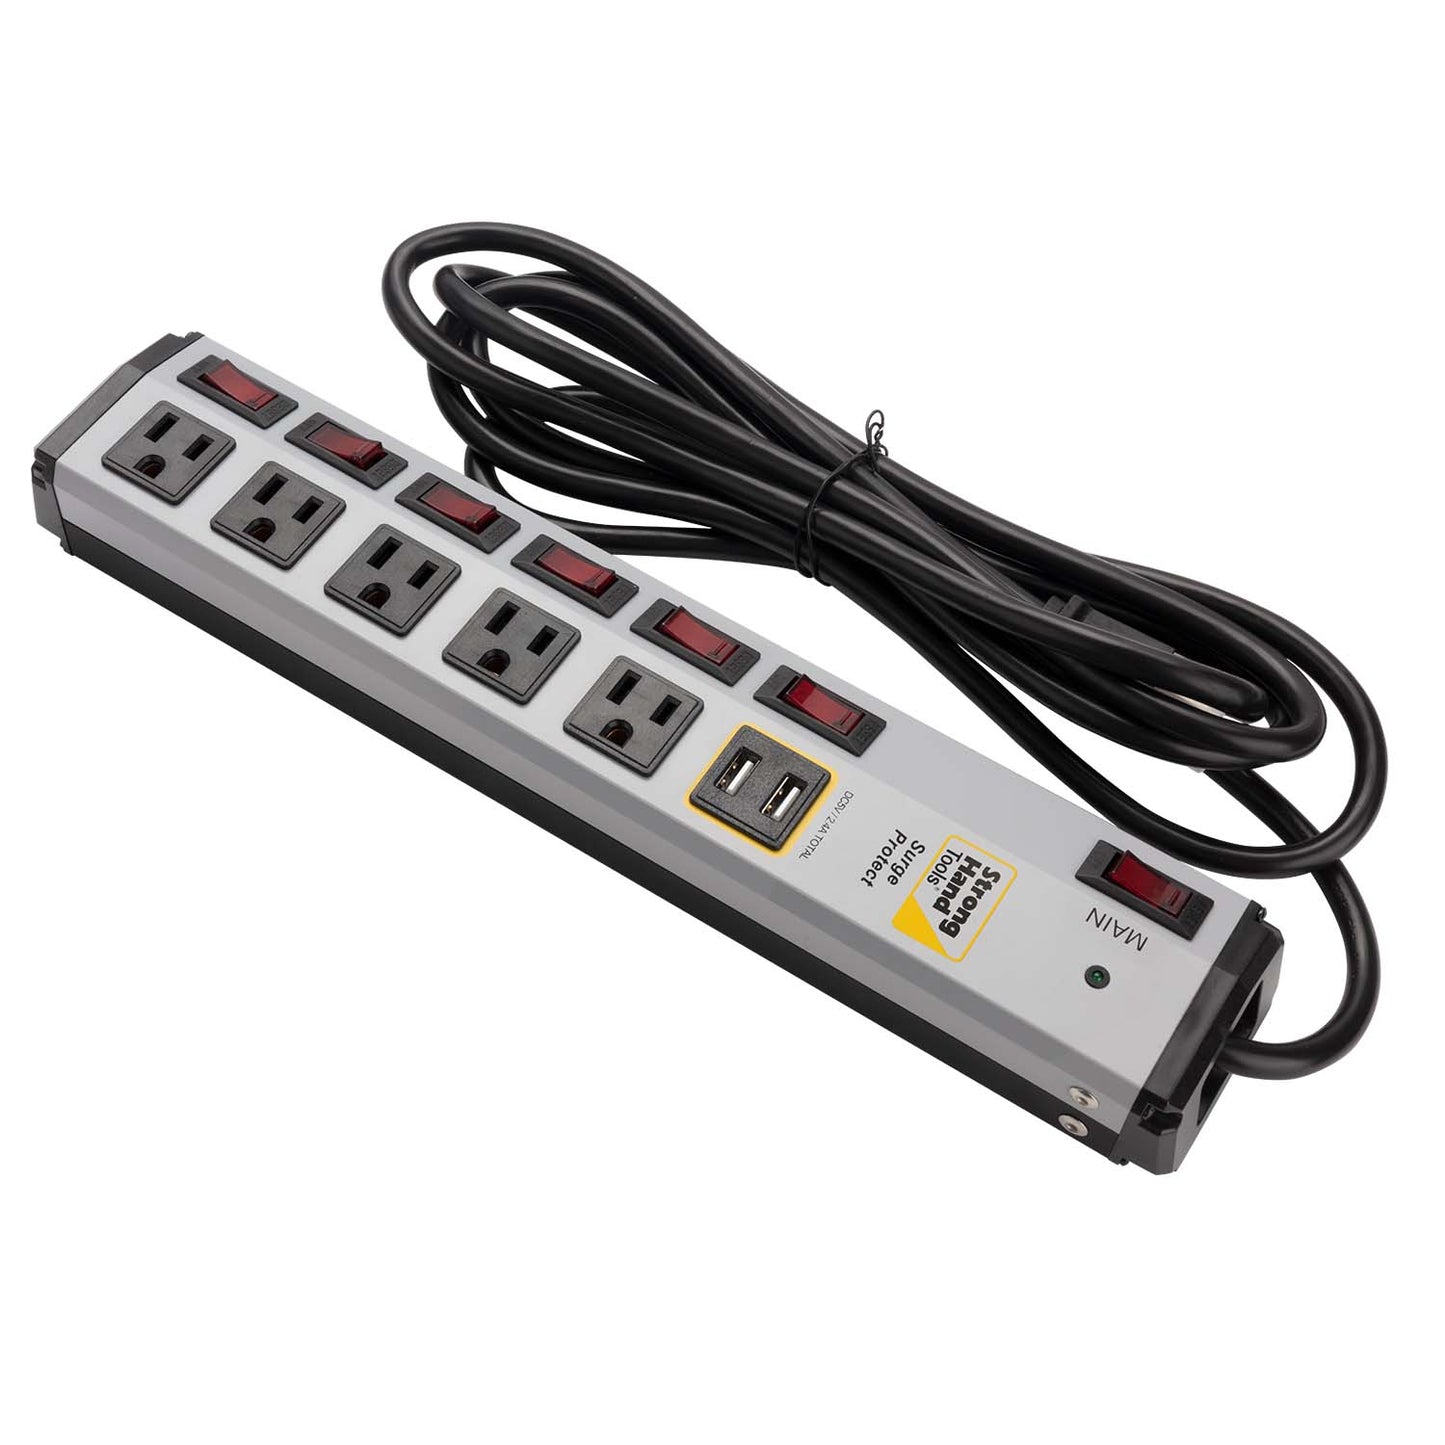 Surge Protector Power Strip w/ USB Port, Metal Case, 10' Cable